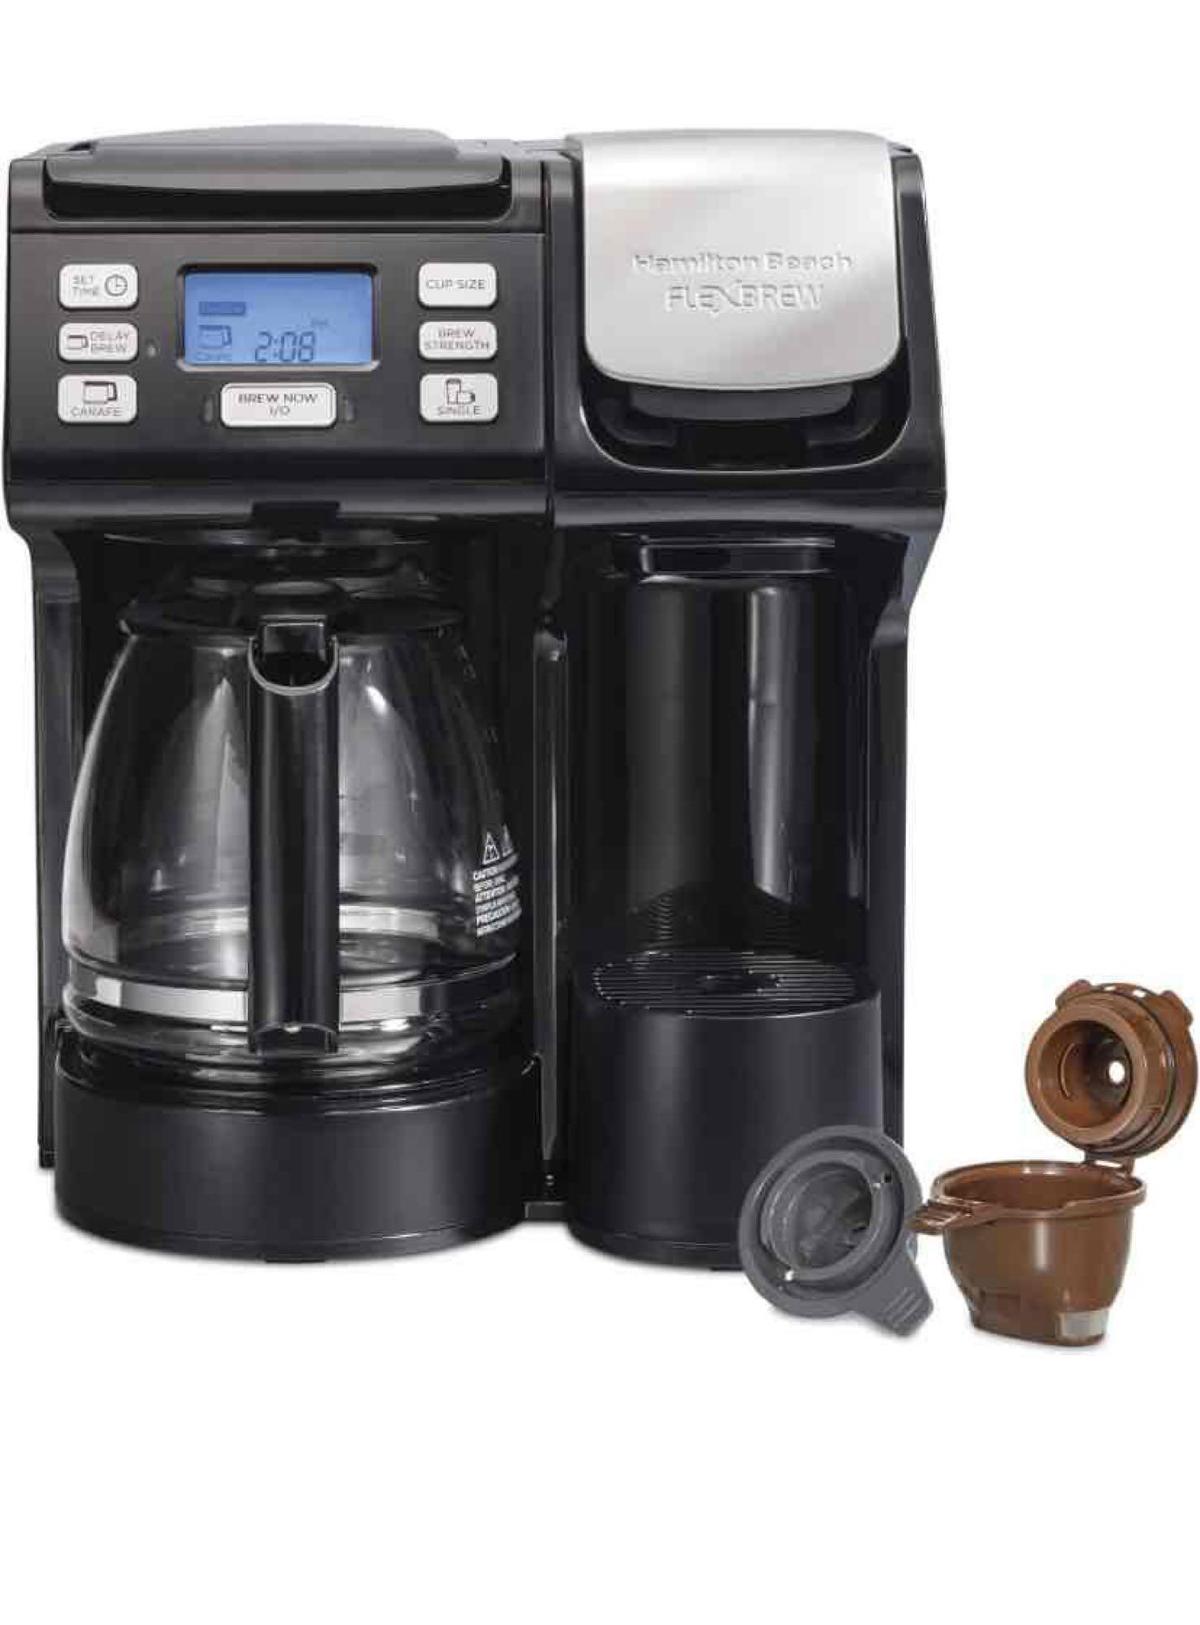 Beach FlexBrew Trio 2-Way Coffee Maker, Compatible with K-Cup Pods or Grounds